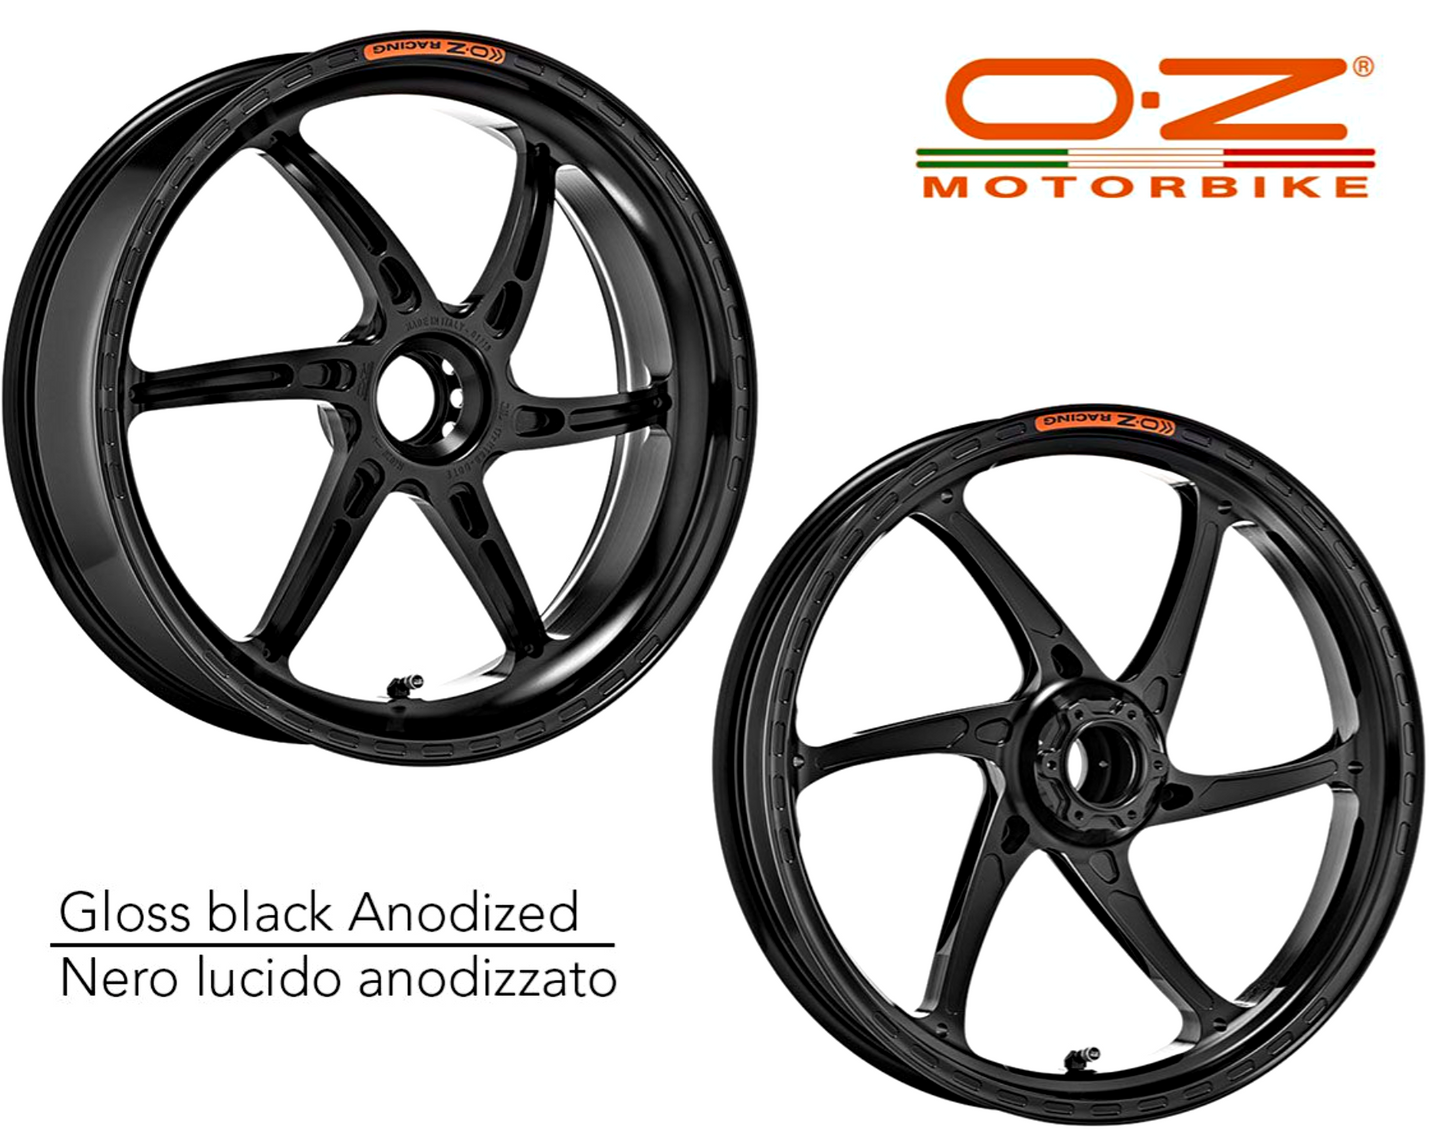 Titanium anodized 7/3 In stock in Italy DUCATI PanigaleV2 Forged wheel set OZ-Racing GASS RS-A F:3.5J-Rear 5.5J Panigale V2 StreetFighterV2 DU102012G-55T